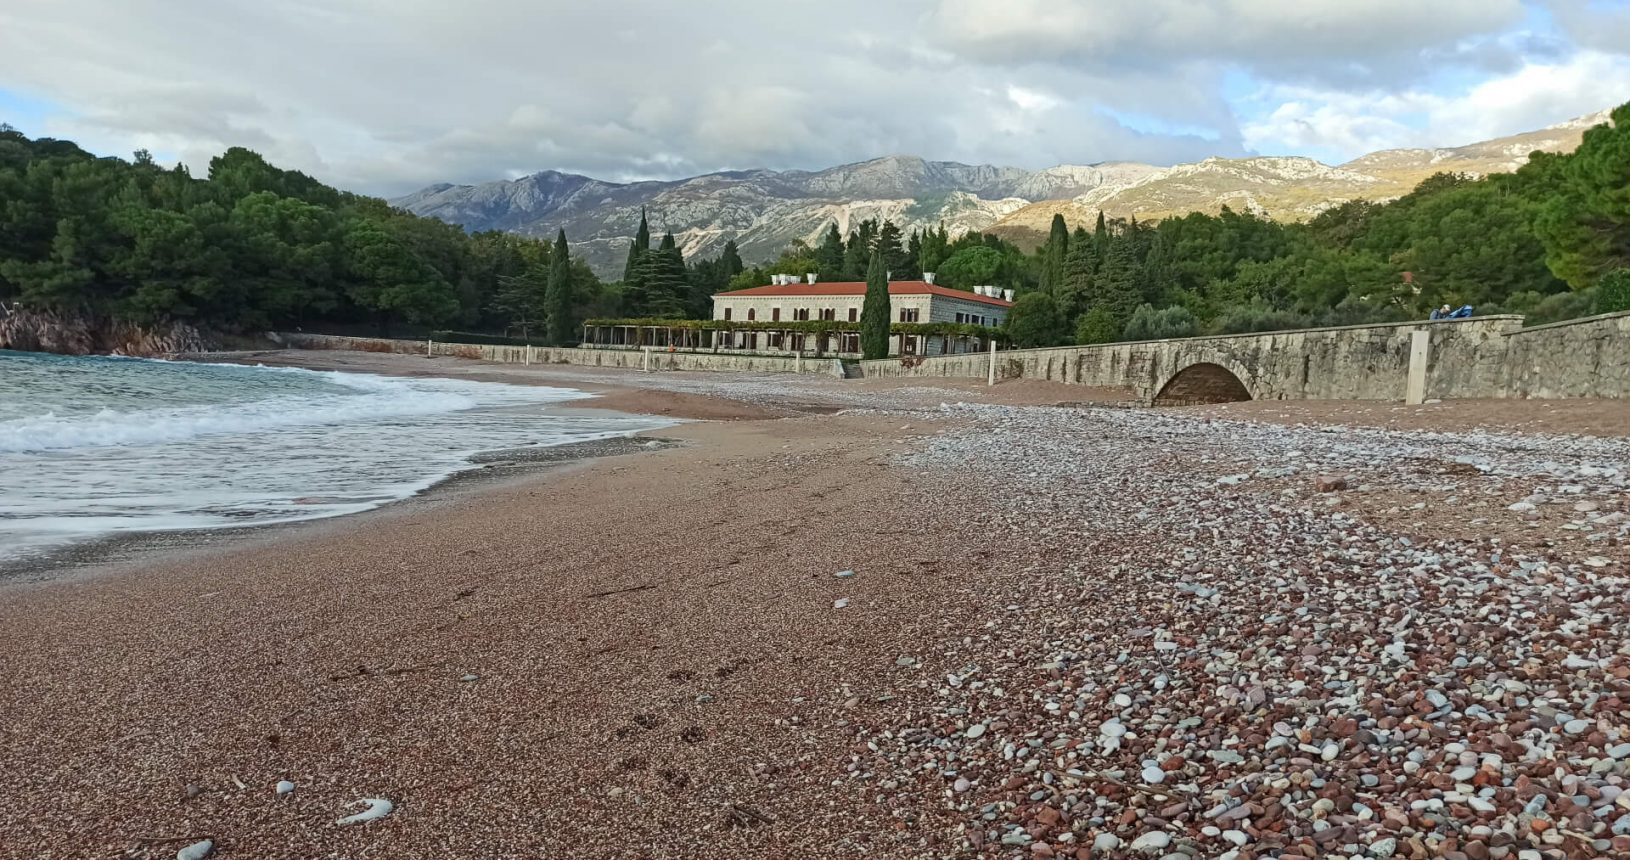 Milocer beach. The view to villa Milocer mountains and nature around